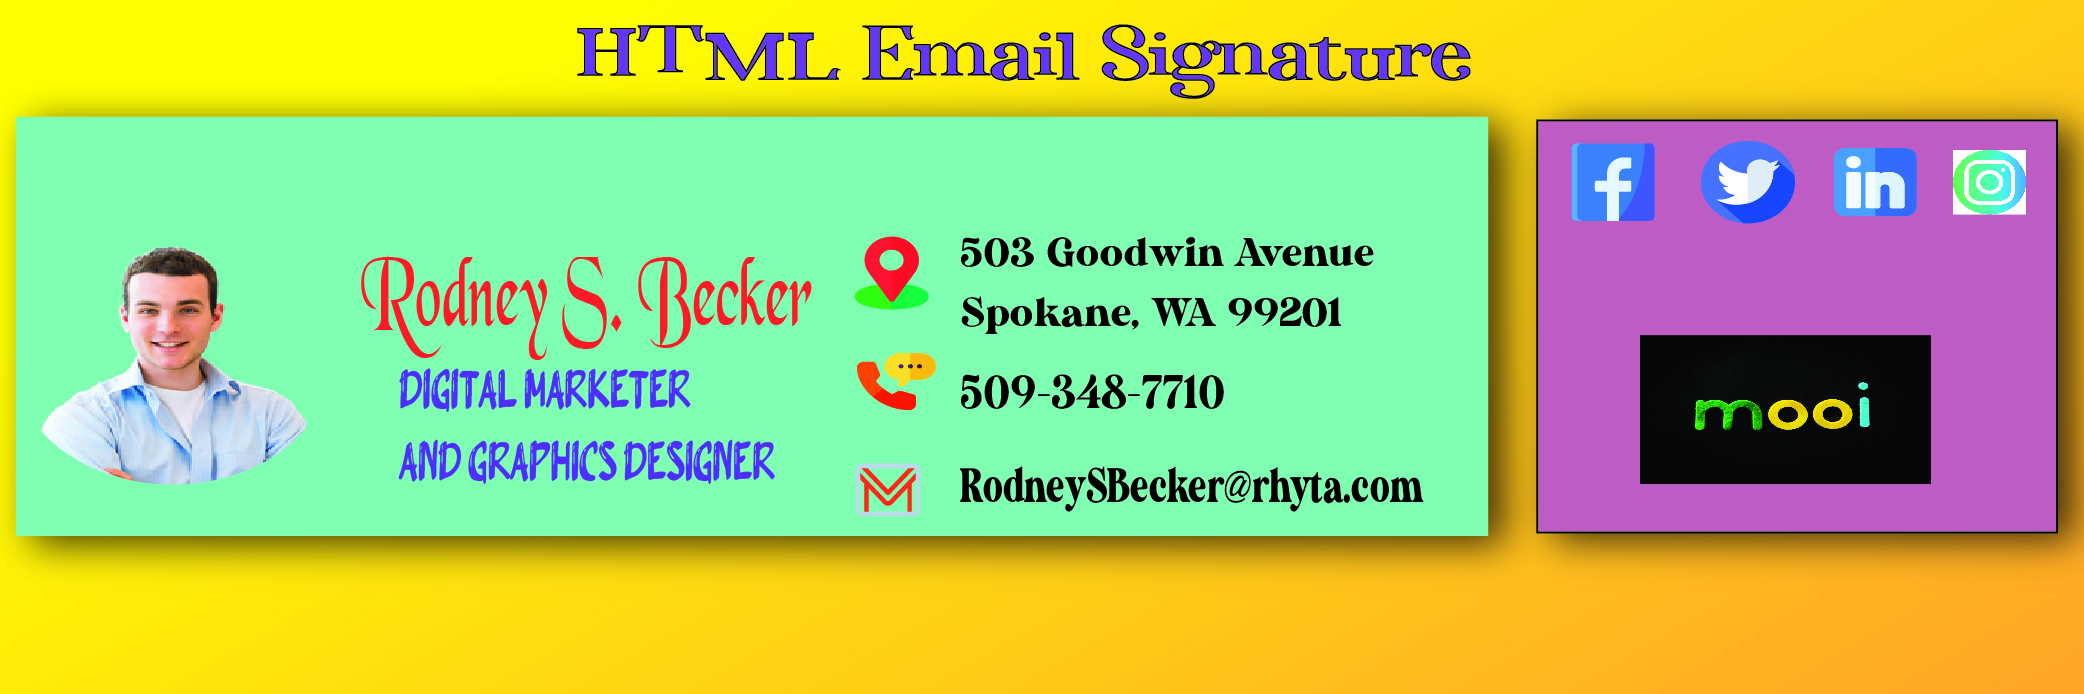 I'll be setting up a professional email signature template